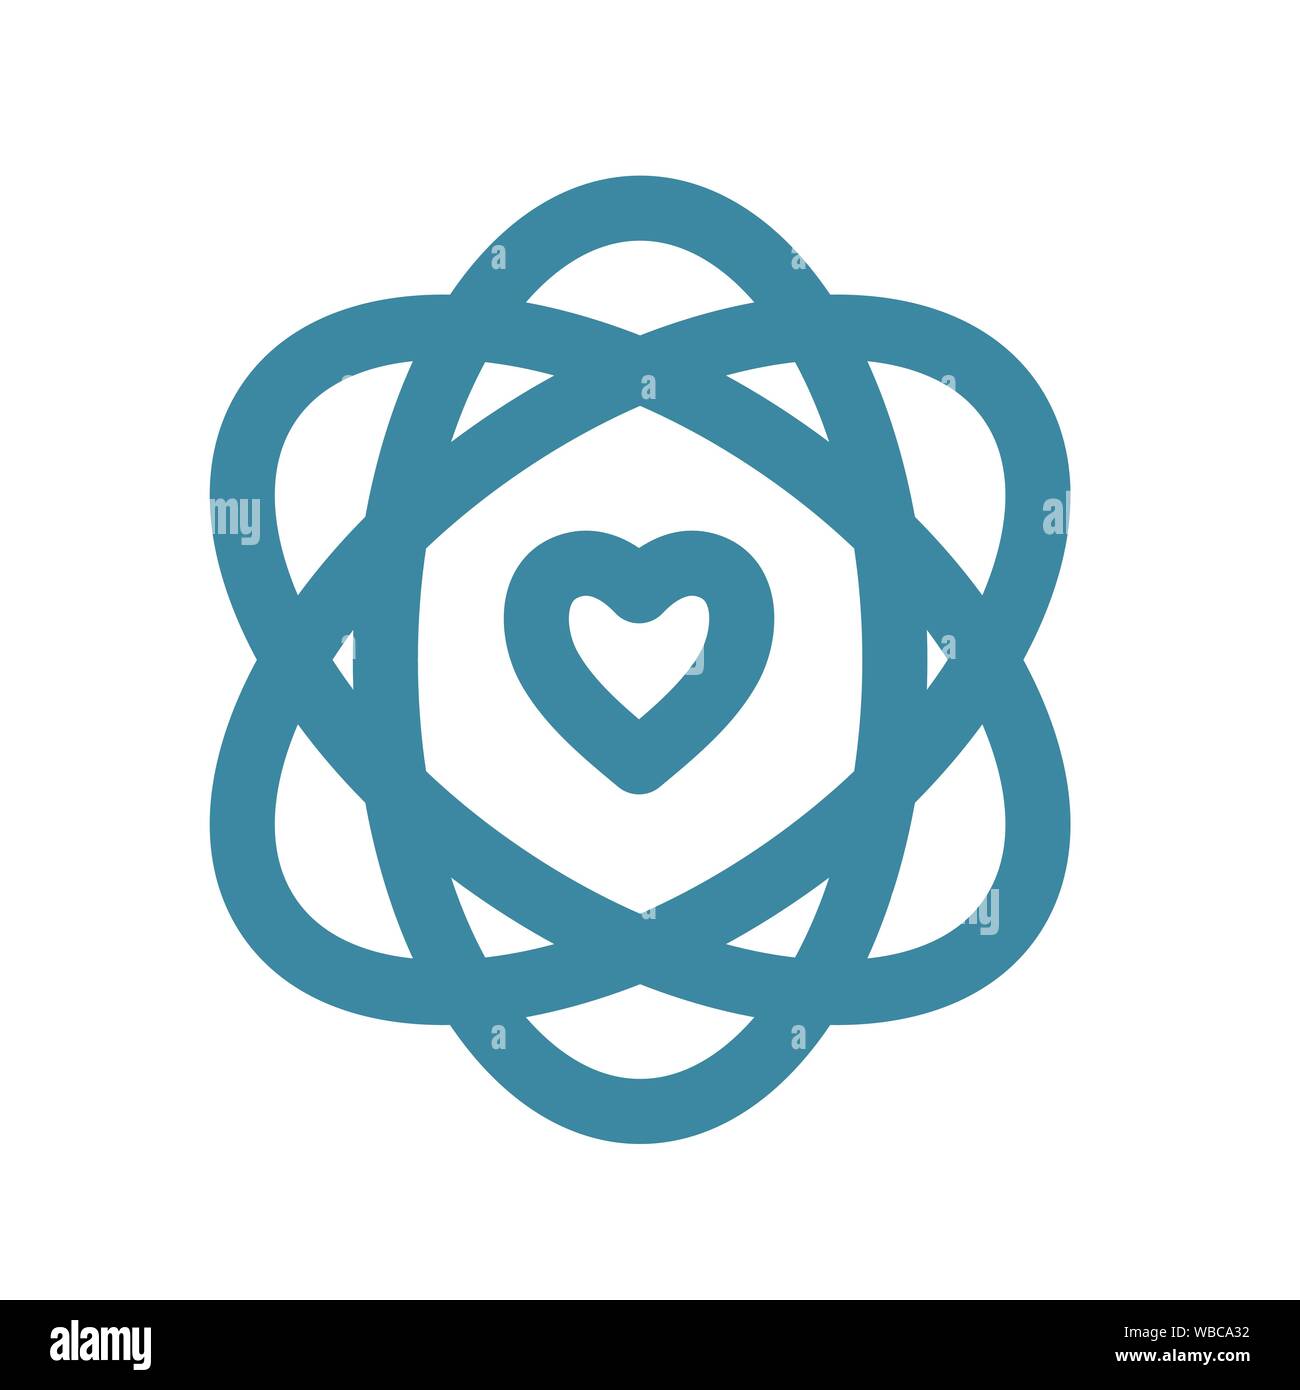 Core Values Icon w Ovals and Heart to signify common belief system Stock Vector